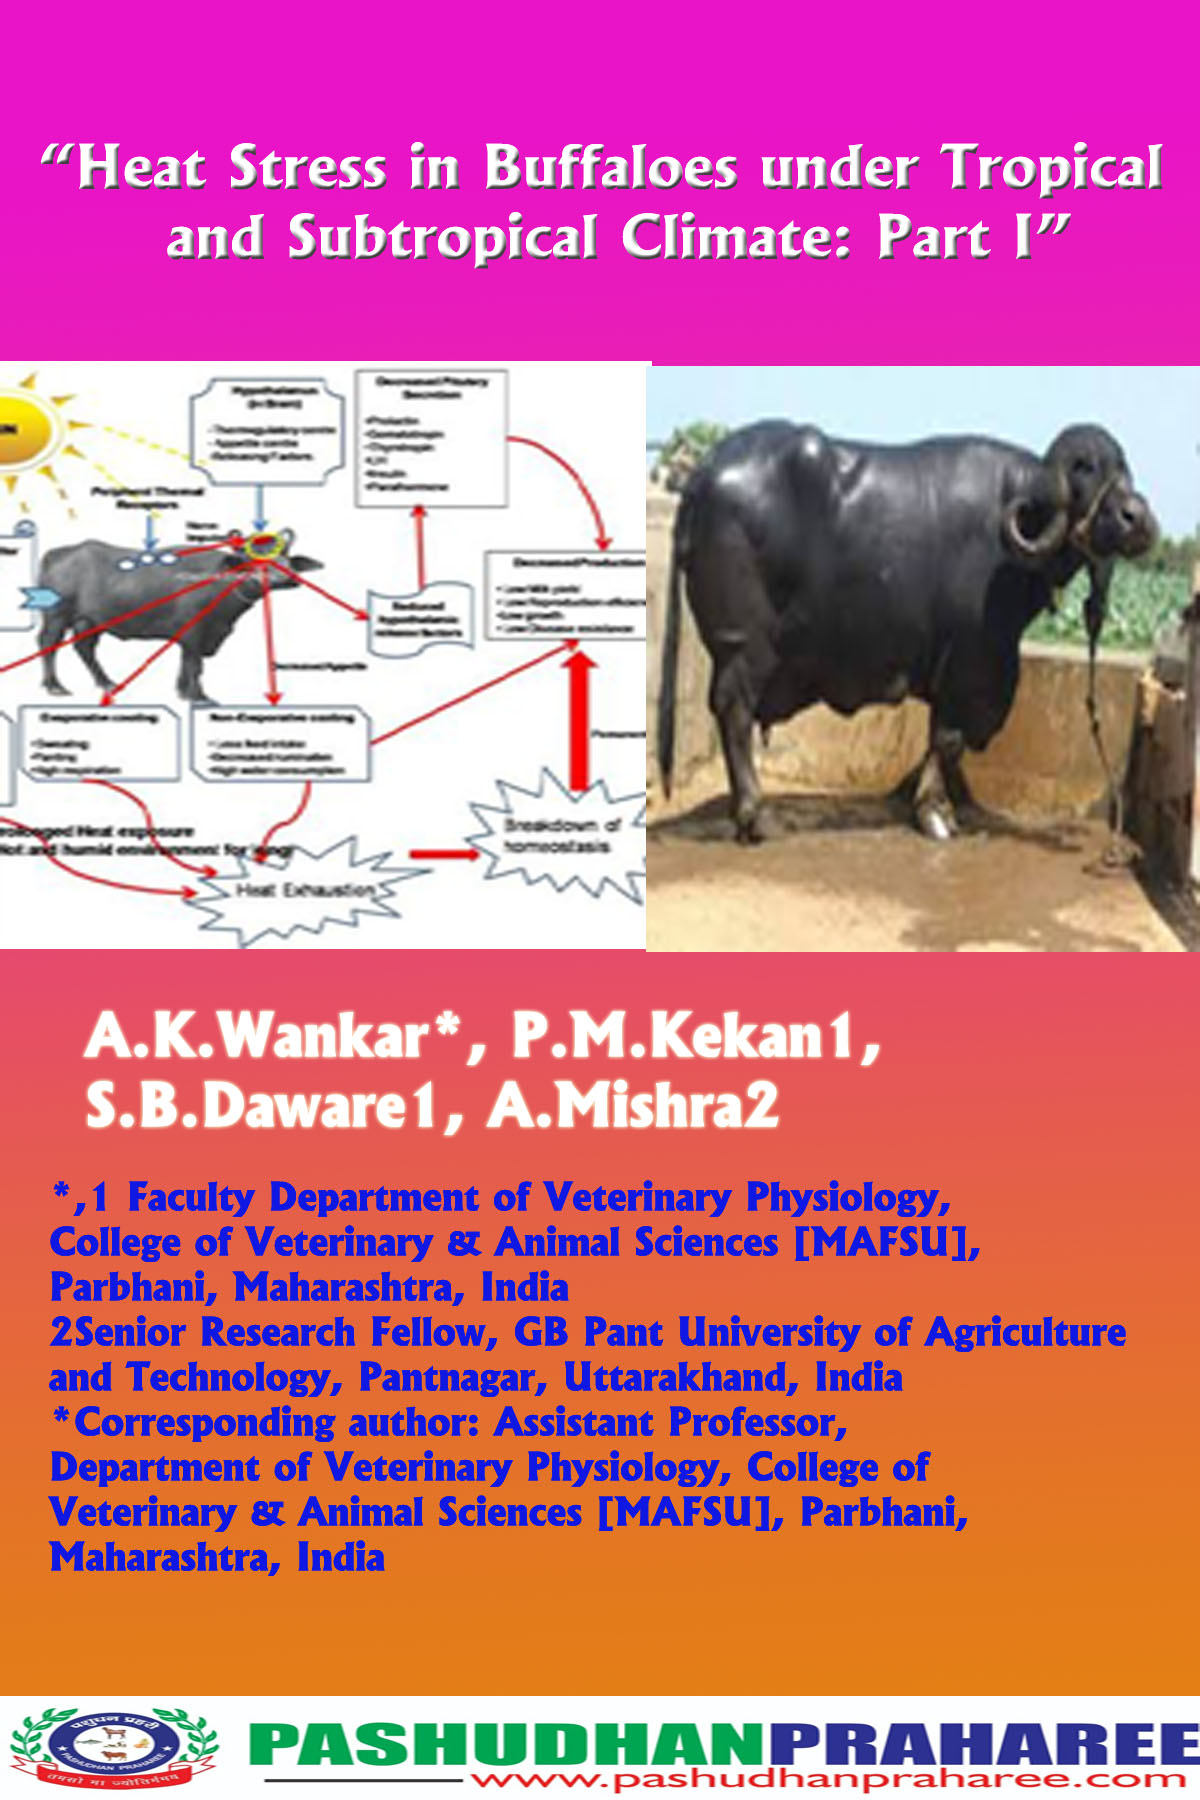 Heat stress in buffaloes under tropical and subtropical climate: Part I –  Pashudhan praharee